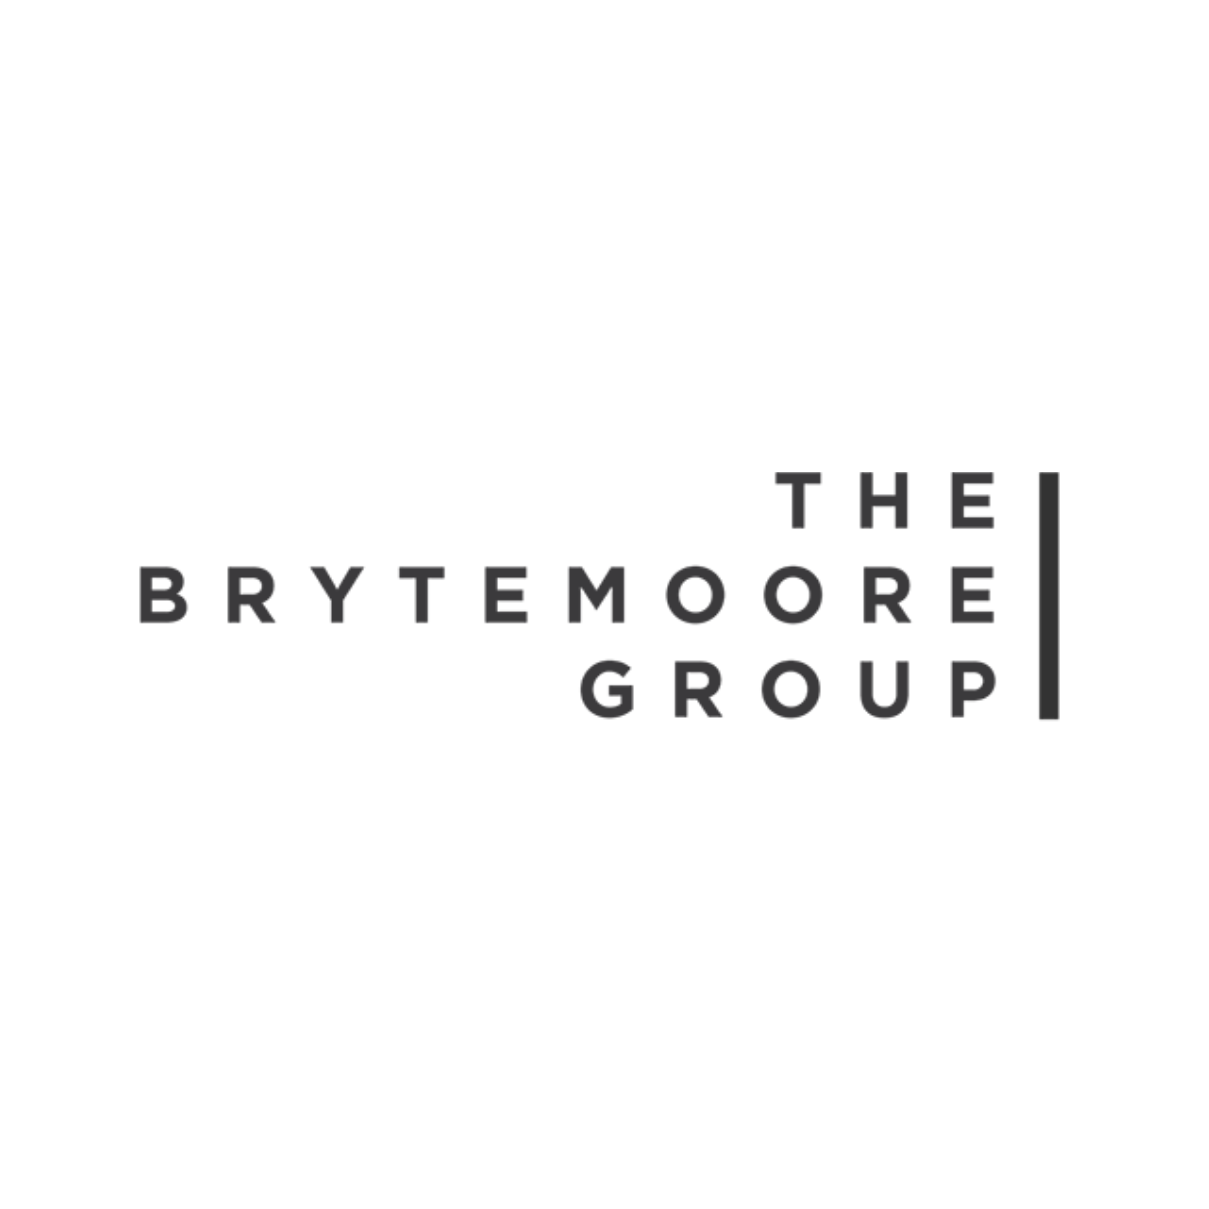 The Brytemoore Group